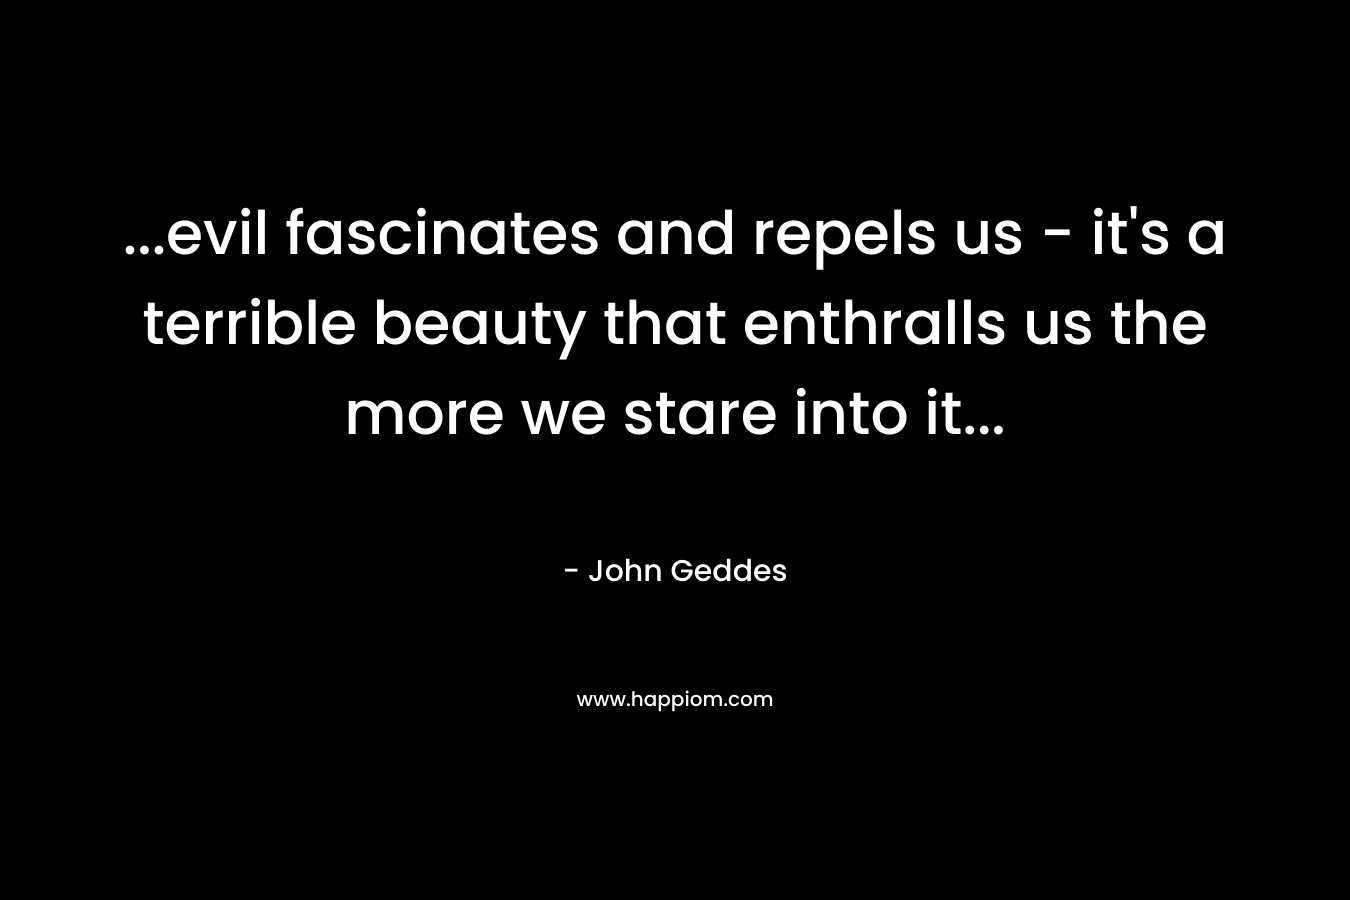 ...evil fascinates and repels us - it's a terrible beauty that enthralls us the more we stare into it...